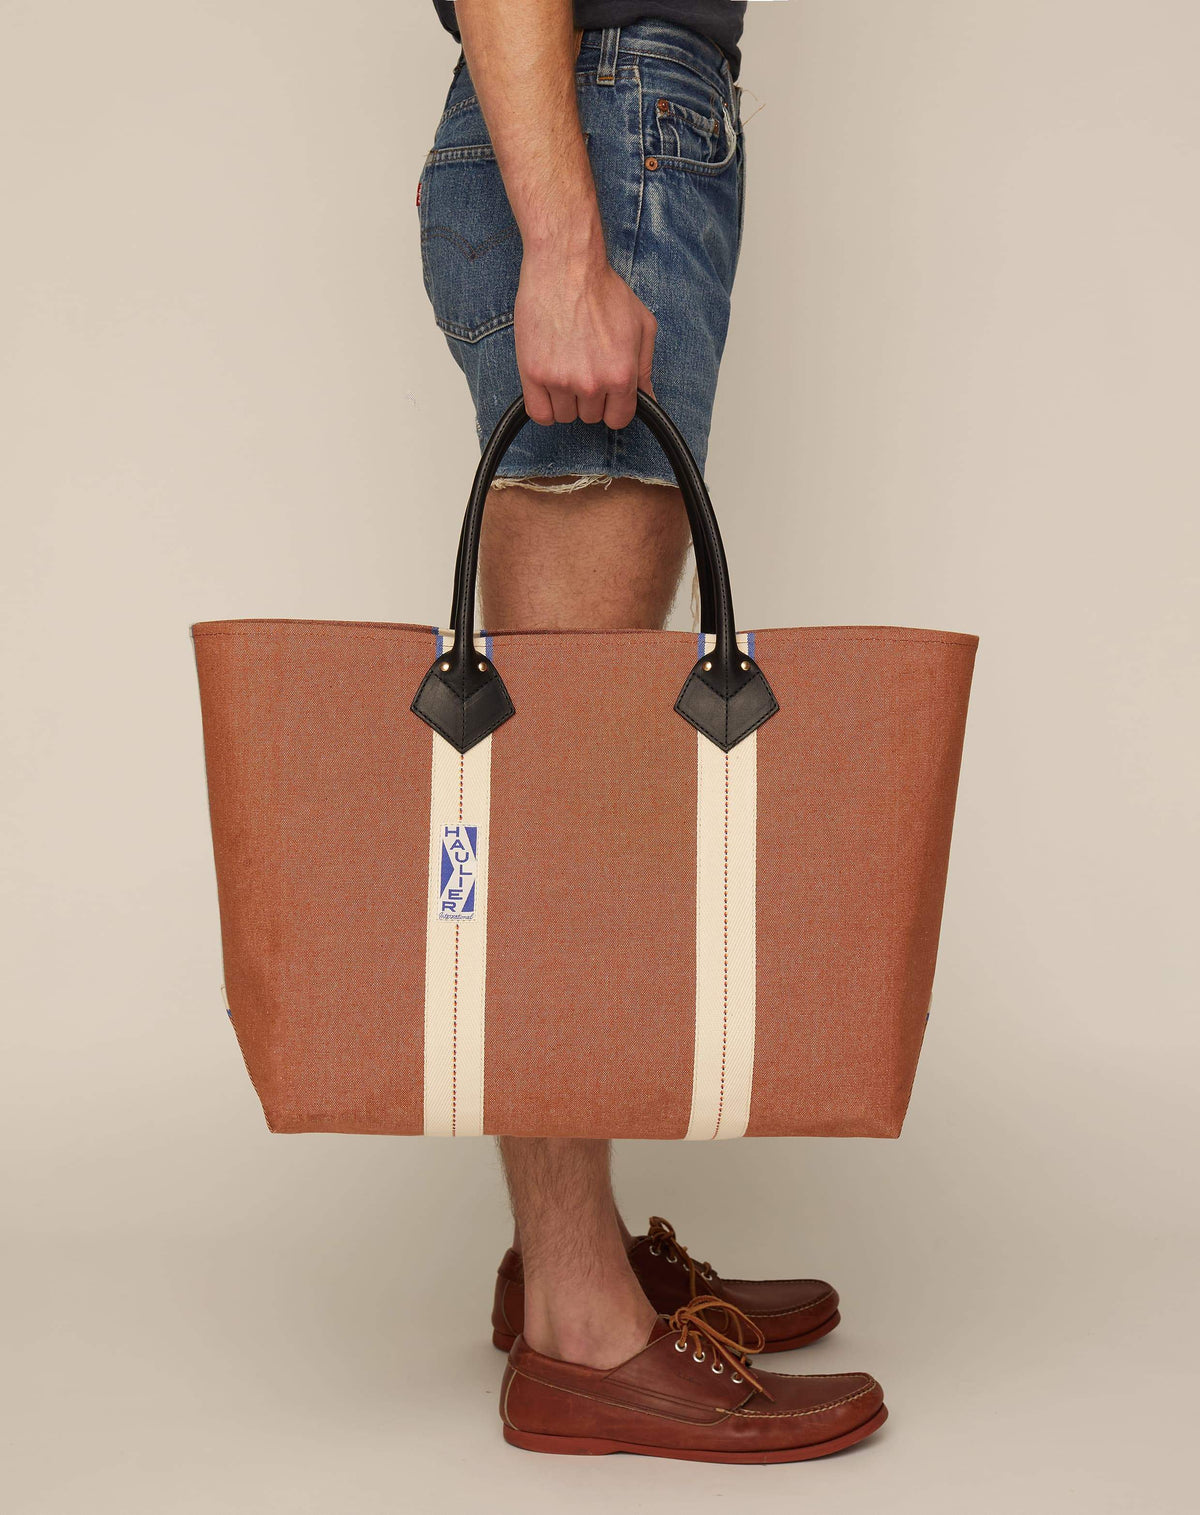 Image of person holding classic canvas tote bag in tan colour with black leather handles and contrasting natural ecru stripes.